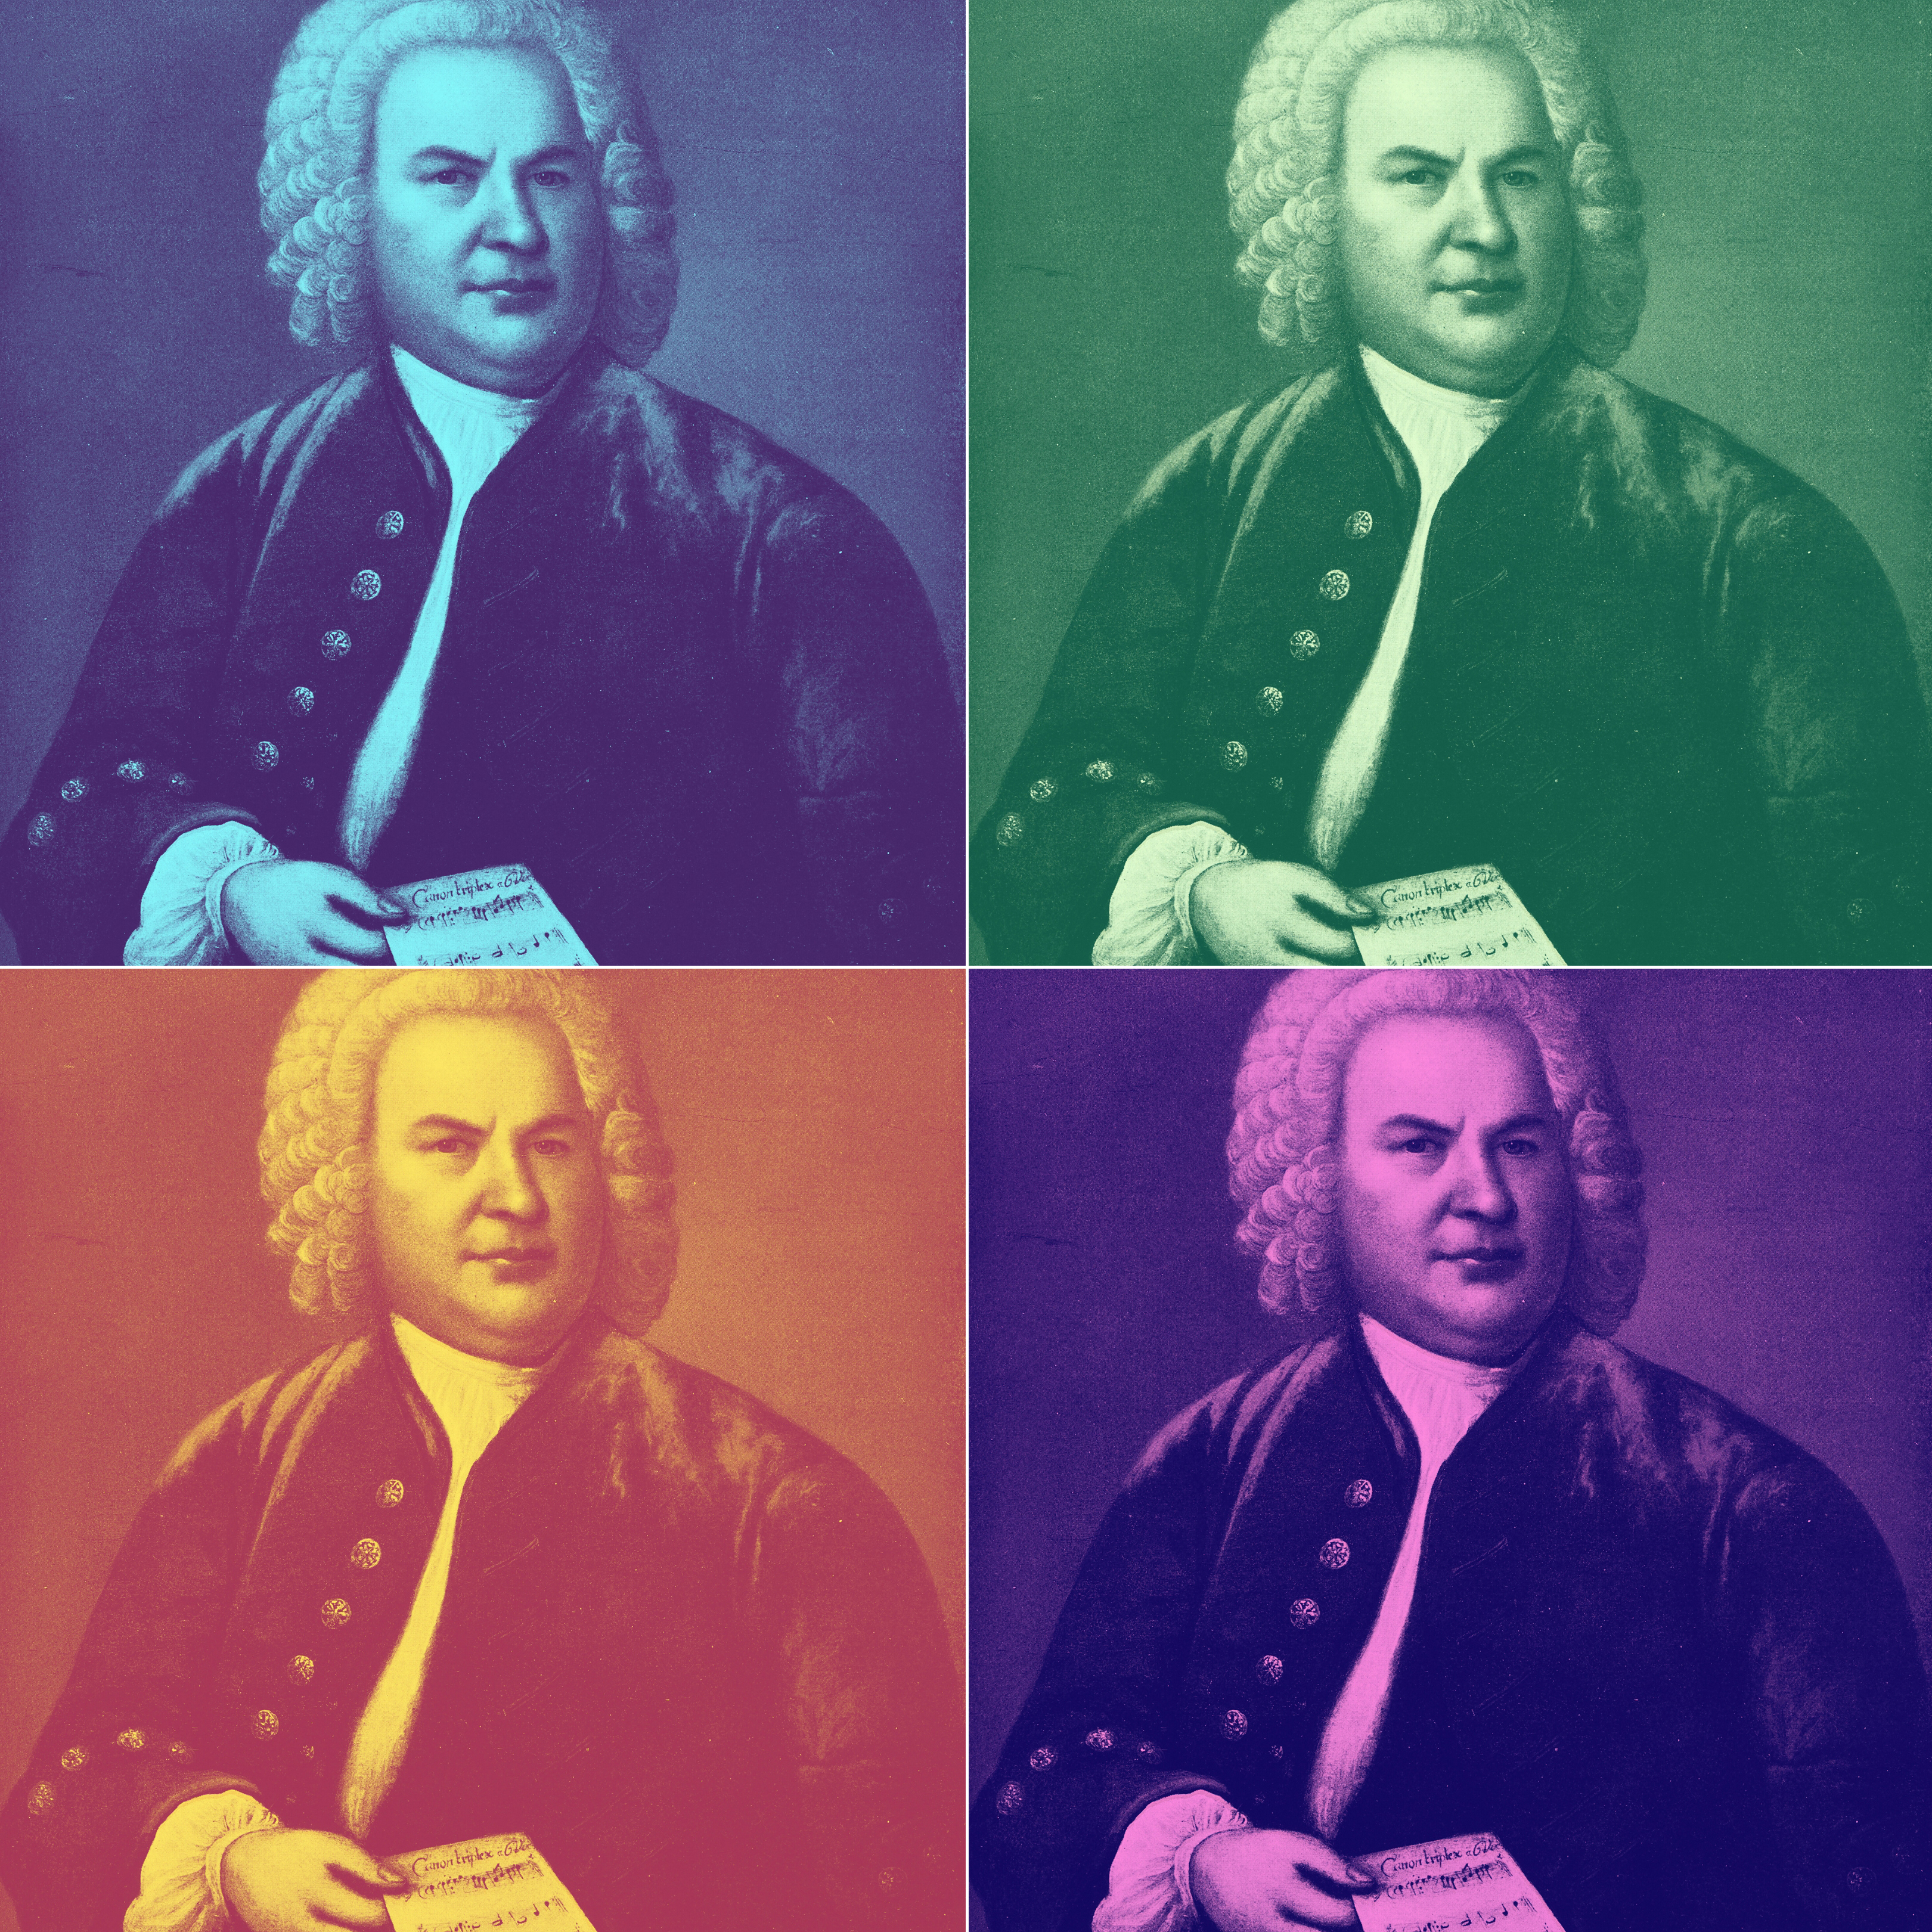 Bach collage